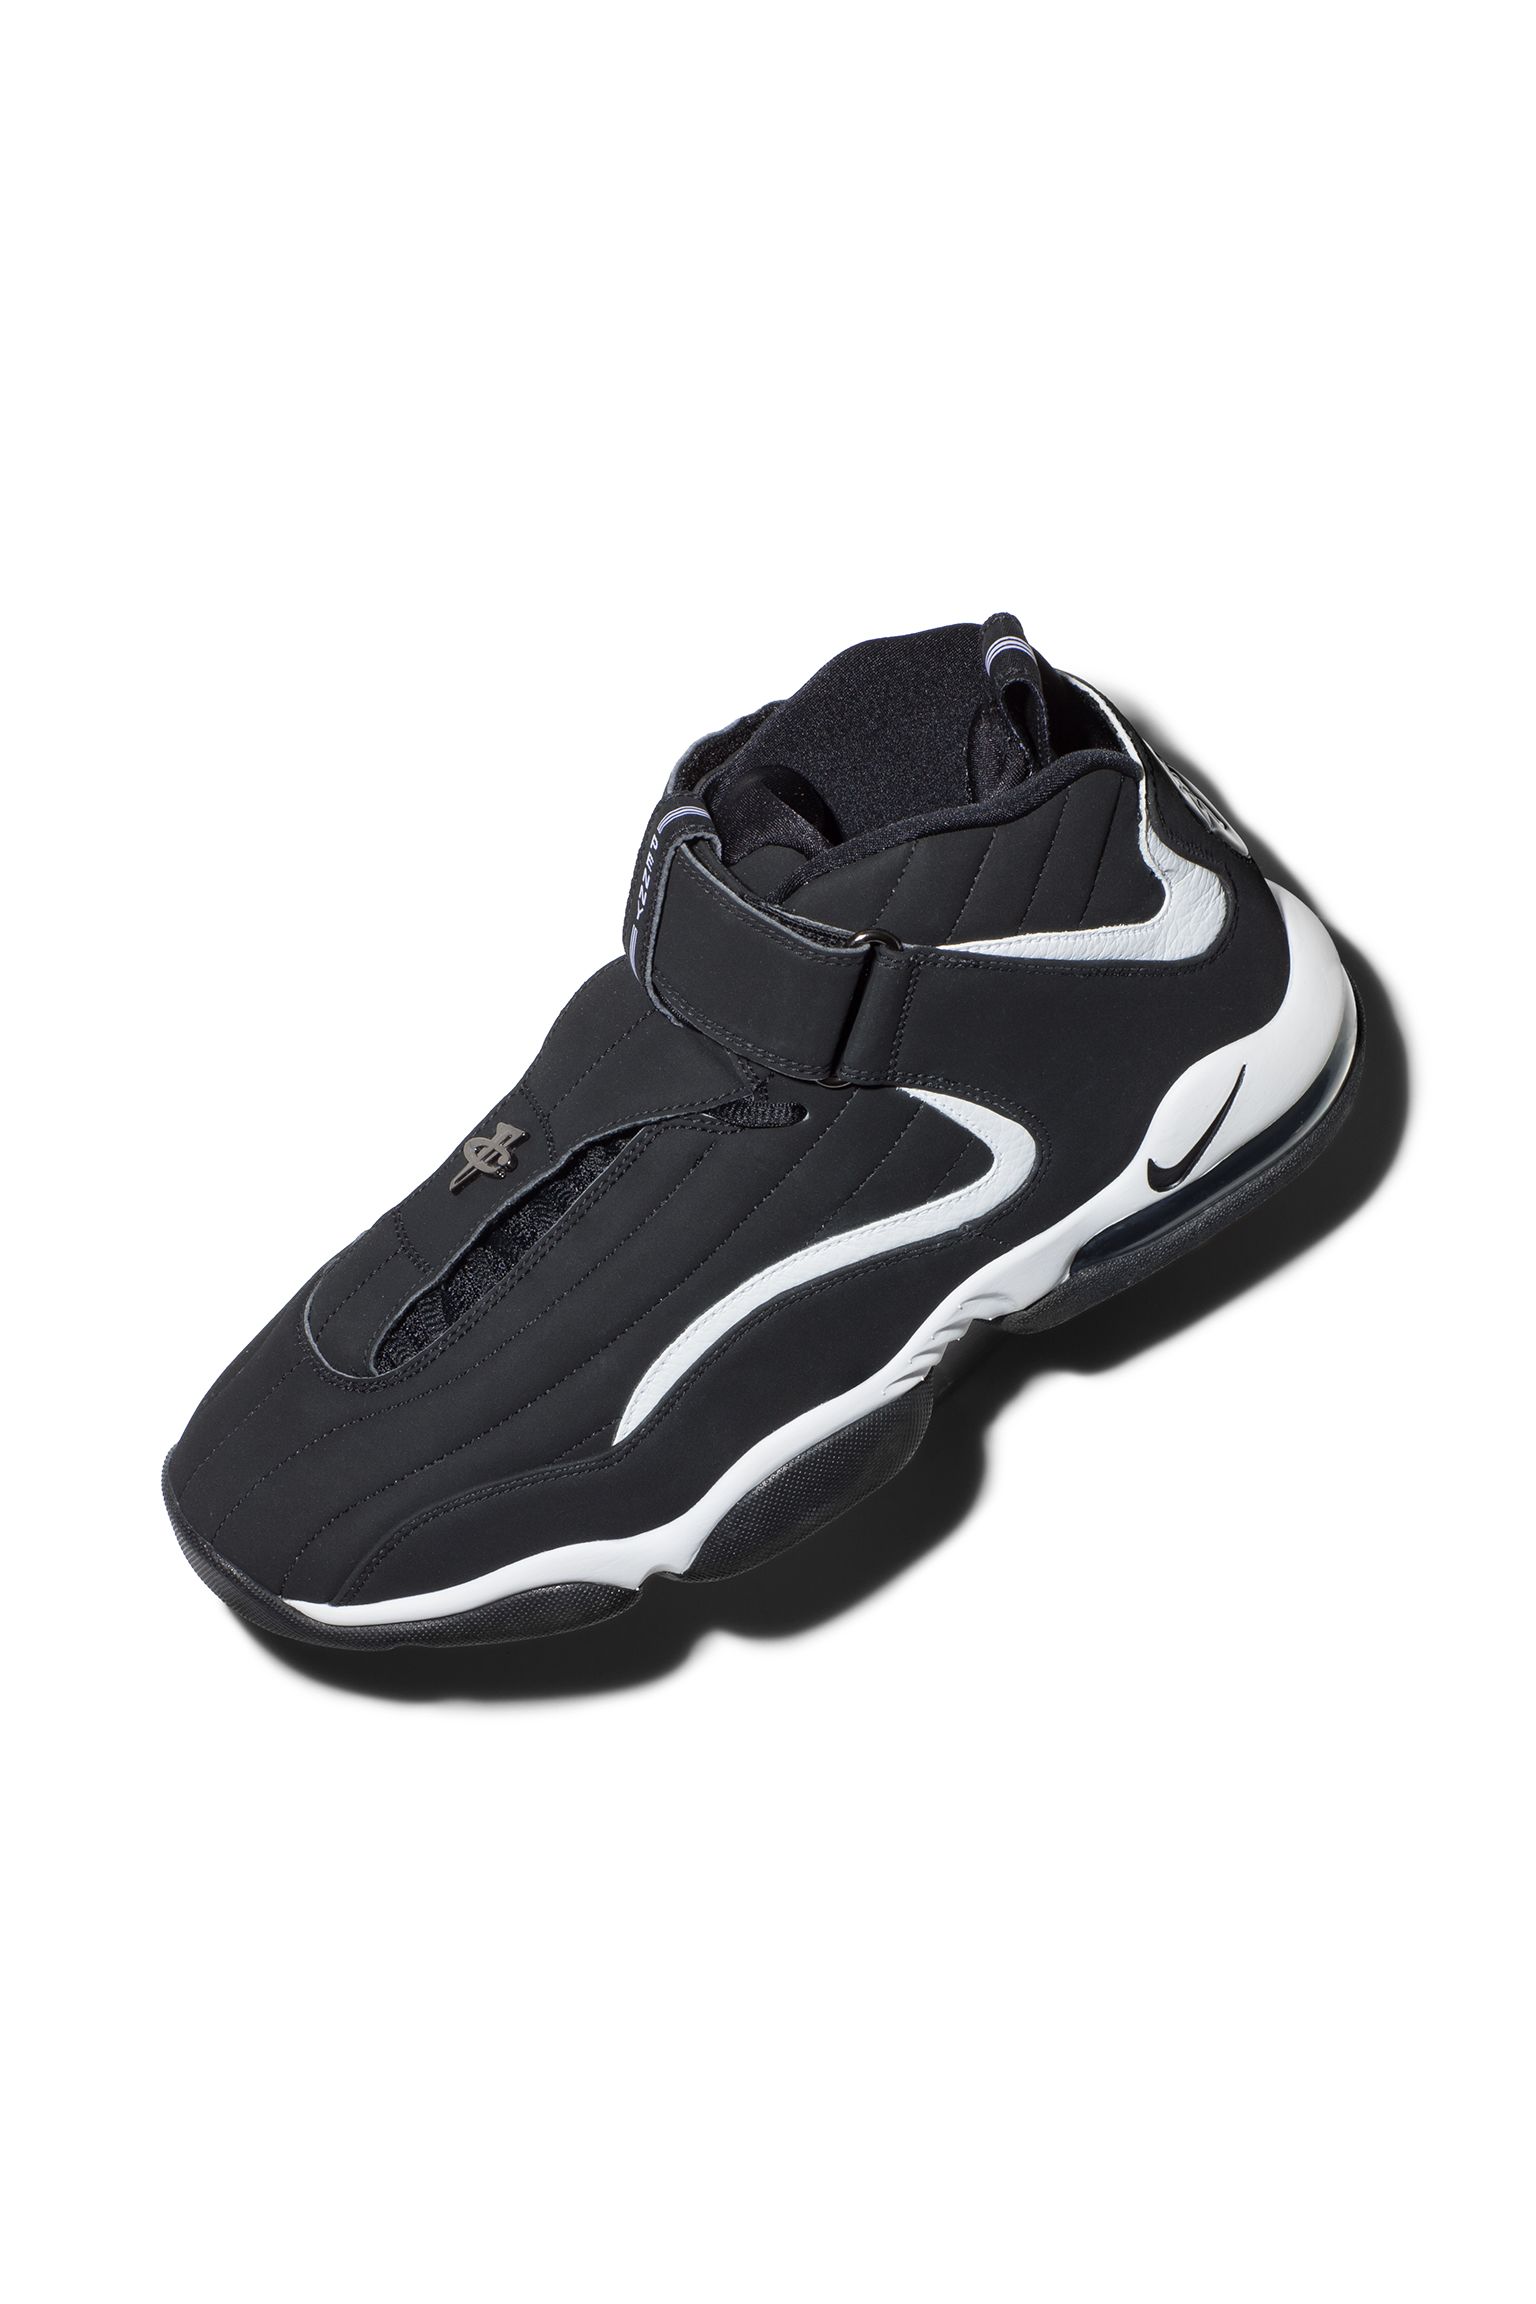 nike air penny 4 for sale